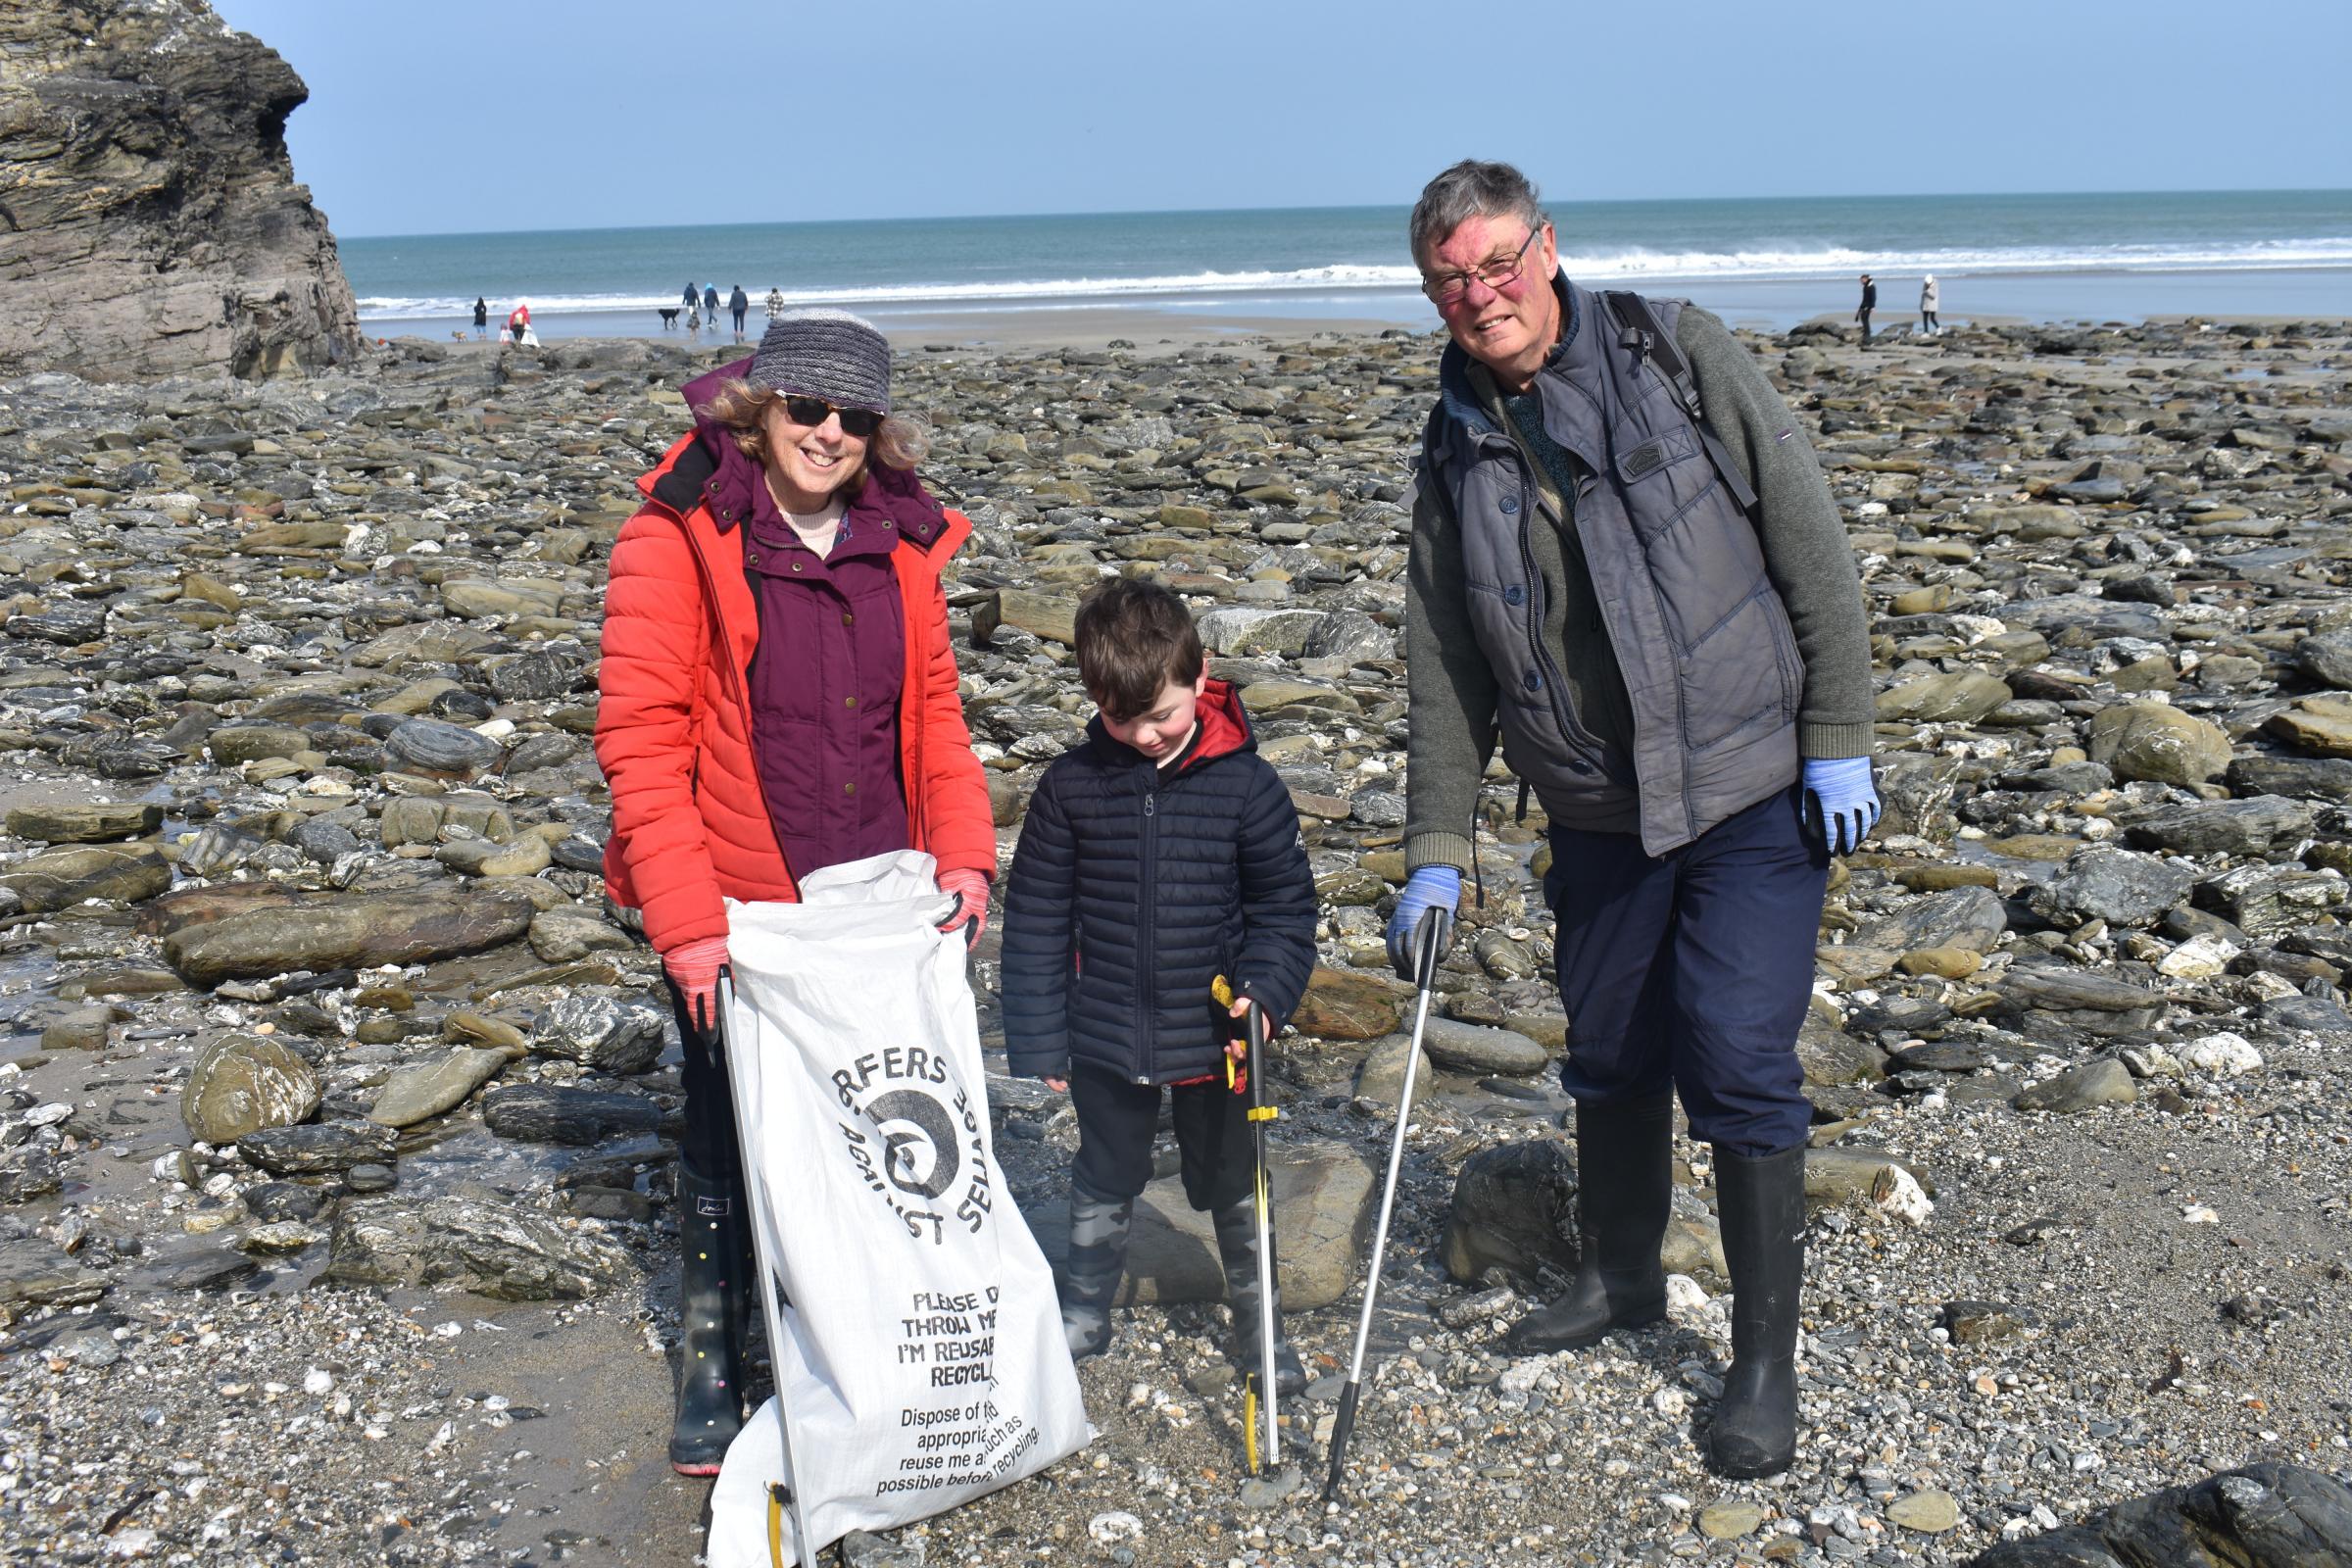 Phil Tina and Stanley Rowe litter picking on Portreath beach